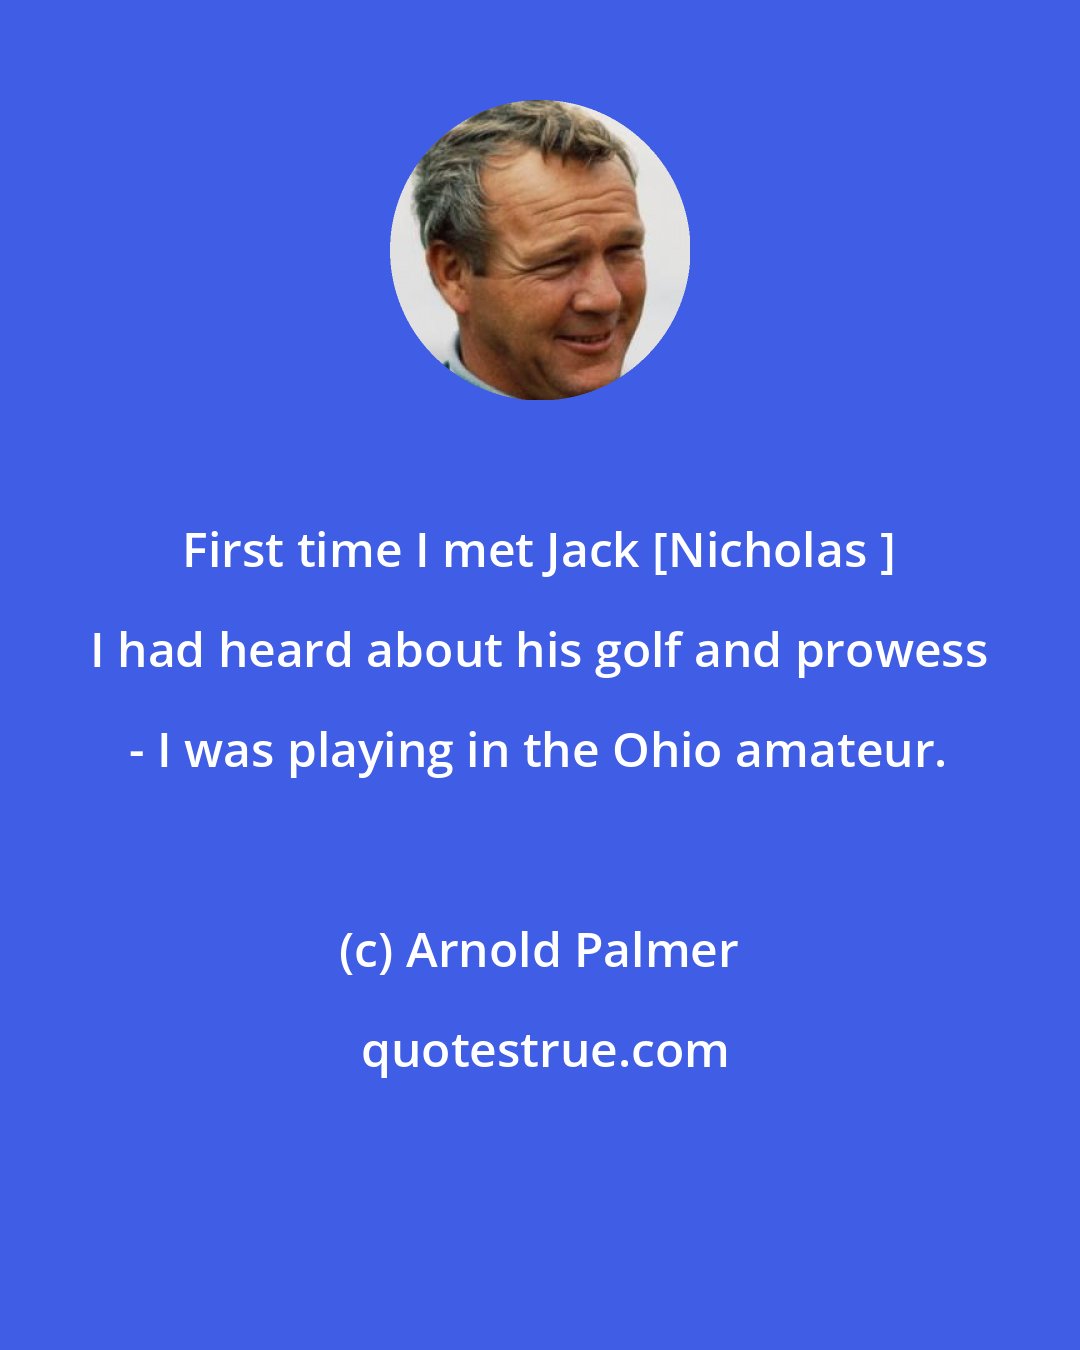 Arnold Palmer: First time I met Jack [Nicholas ] I had heard about his golf and prowess - I was playing in the Ohio amateur.